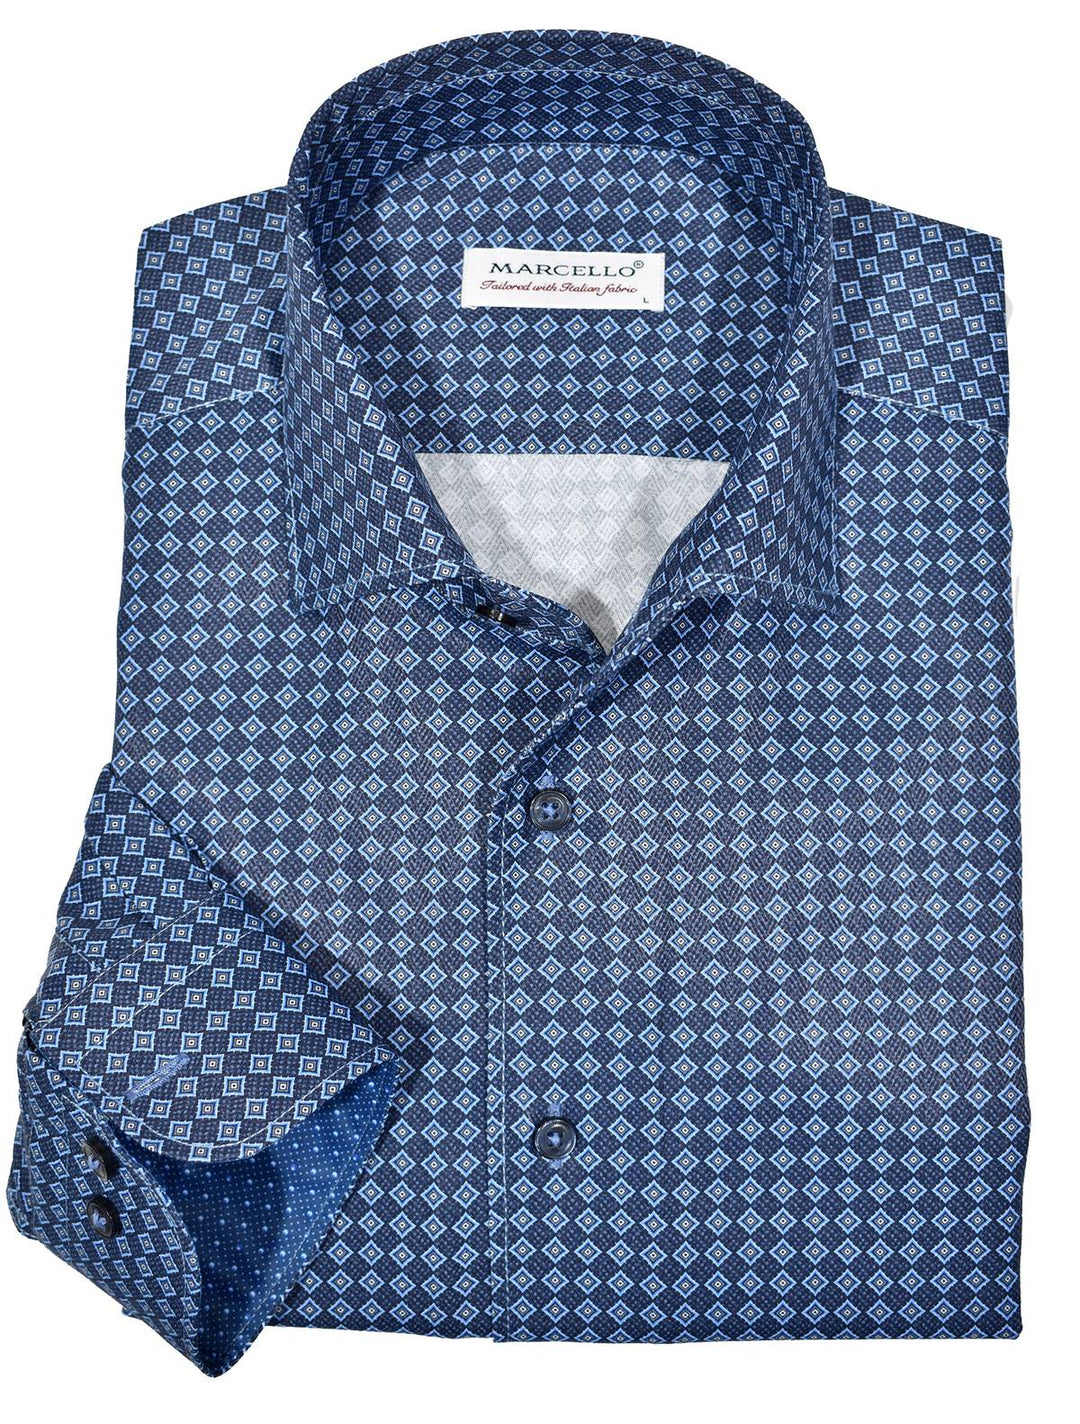 Marcello exclusive 1 piece roll collar shirt is the ultimate in style and sophistication.  The one piece collar stands perfectly and looks great alone or under a sport coat.  You will surely want every one piece roll collar shirt we offer.  Rich cotton / microfiber fabric. Fashion diamond medallion pattern in rich blue colors. Adjustable 2 button cuffs. Unique extra sleeve button to roll cuffs without flaring. Classic shaped fit.